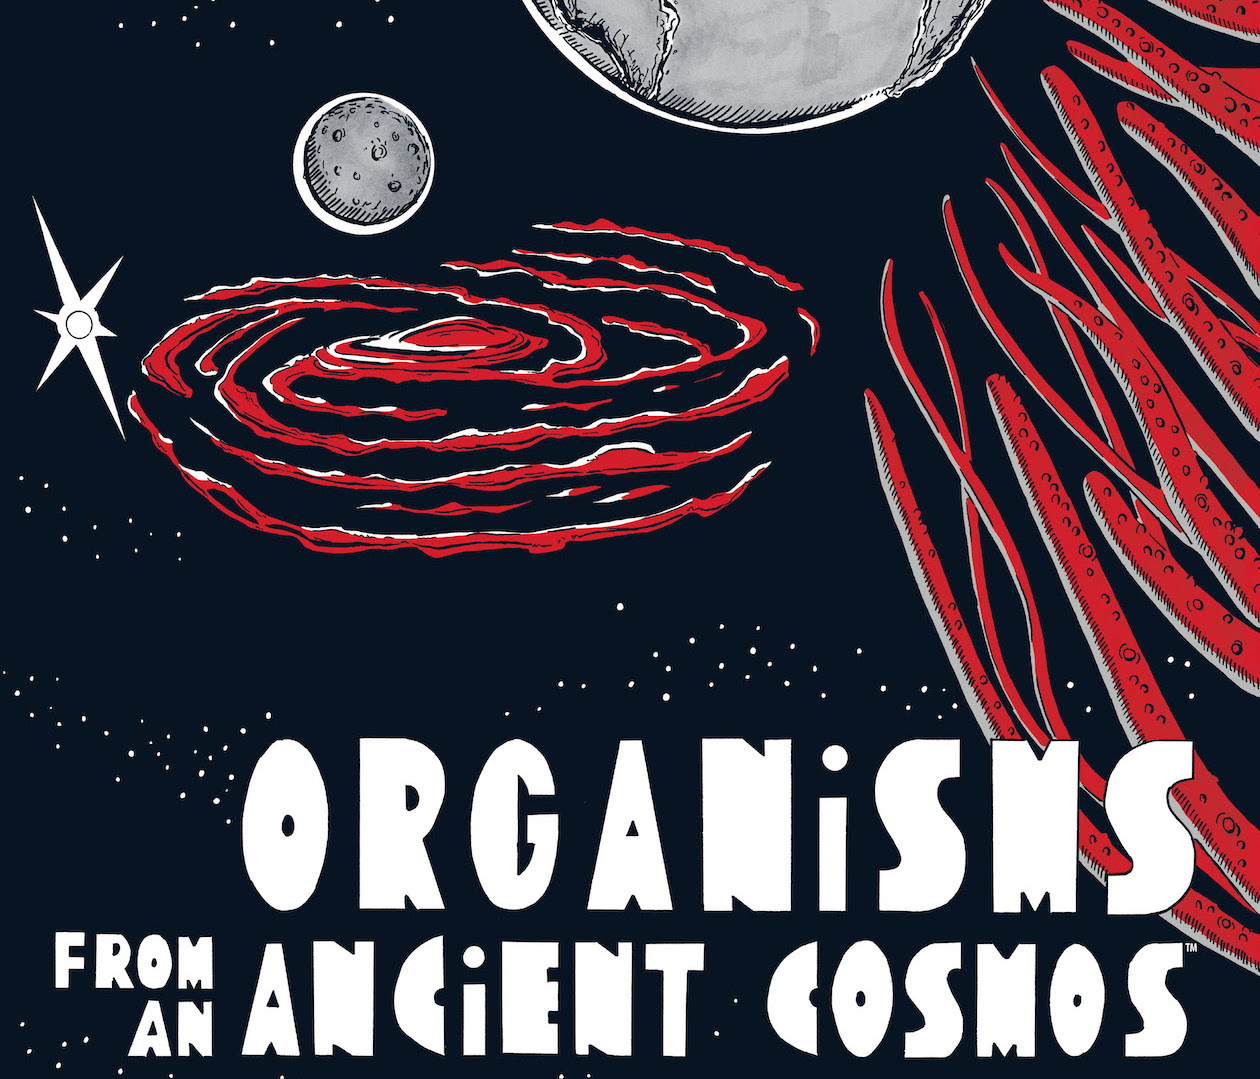 Supernatural sci-fi thriller 'Organisms from an Ancient Cosmos' arrives on Earth October 18th